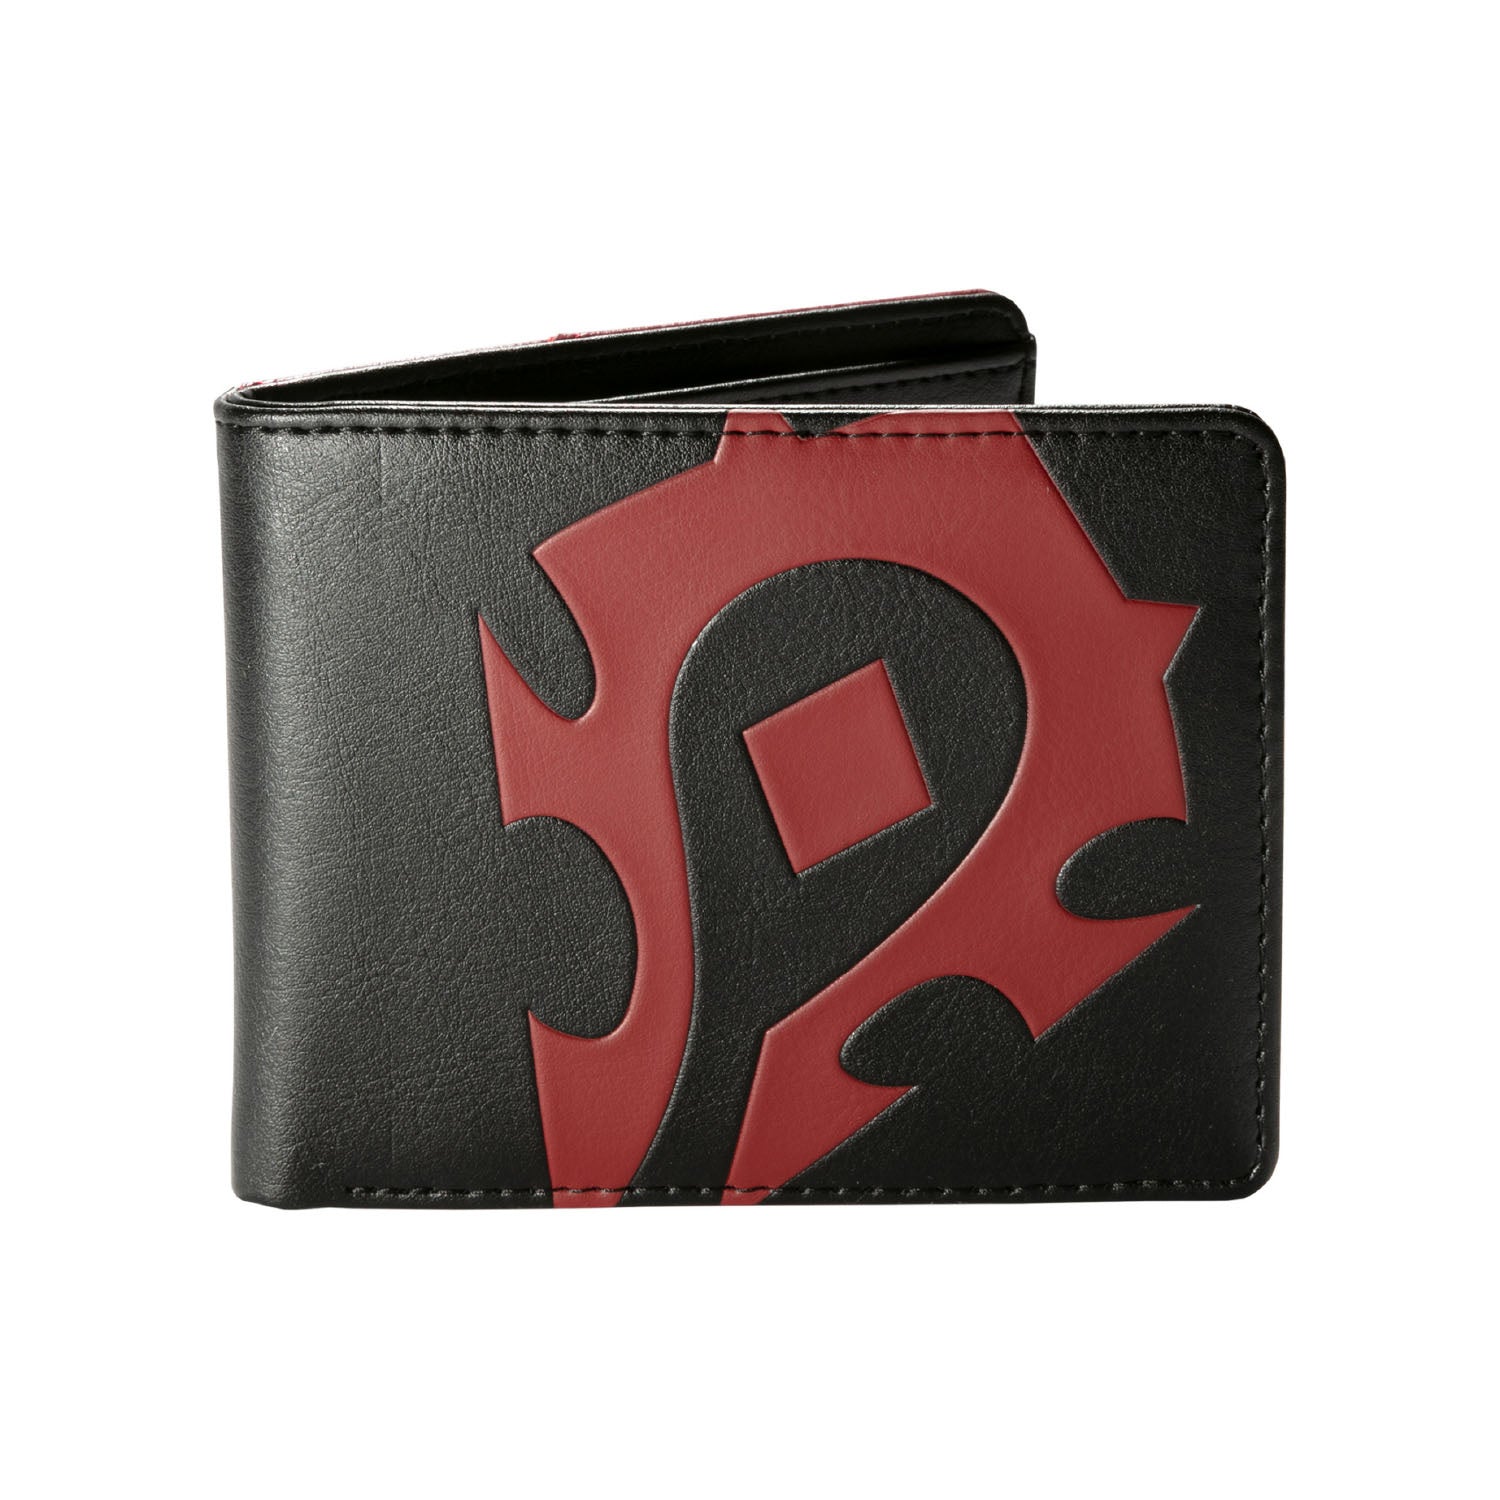 World of Warcraft Horde J!NX Bi-Fold Wallet in Red - Front View